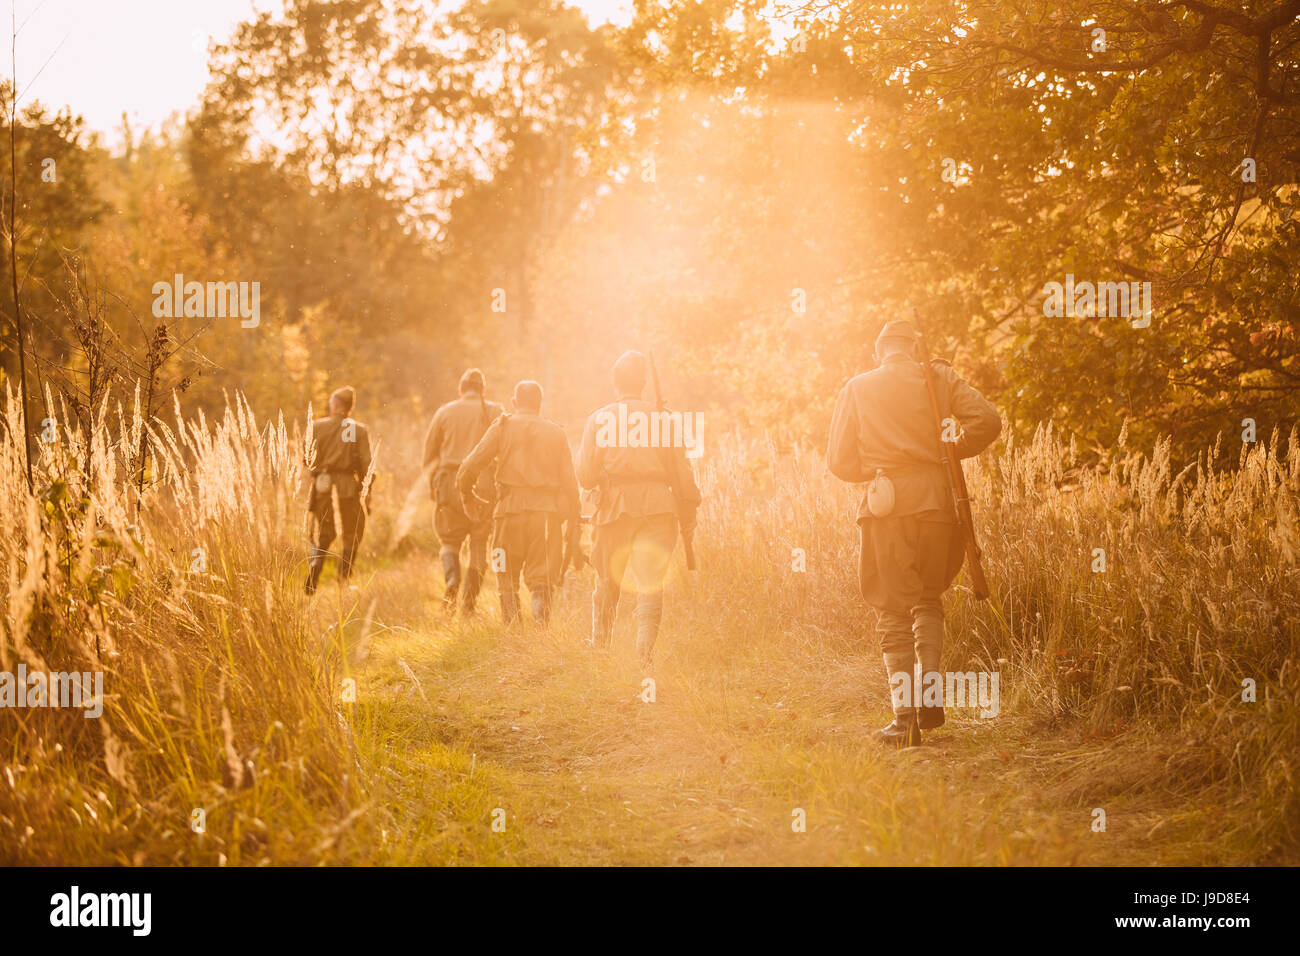 Group Of Reenactors Men Dressed As Russian Soviet Red Army Infantry Soldiers Of World War II Marching In Autumn Forest With Weapons At Sunset Time Dur Stock Photo